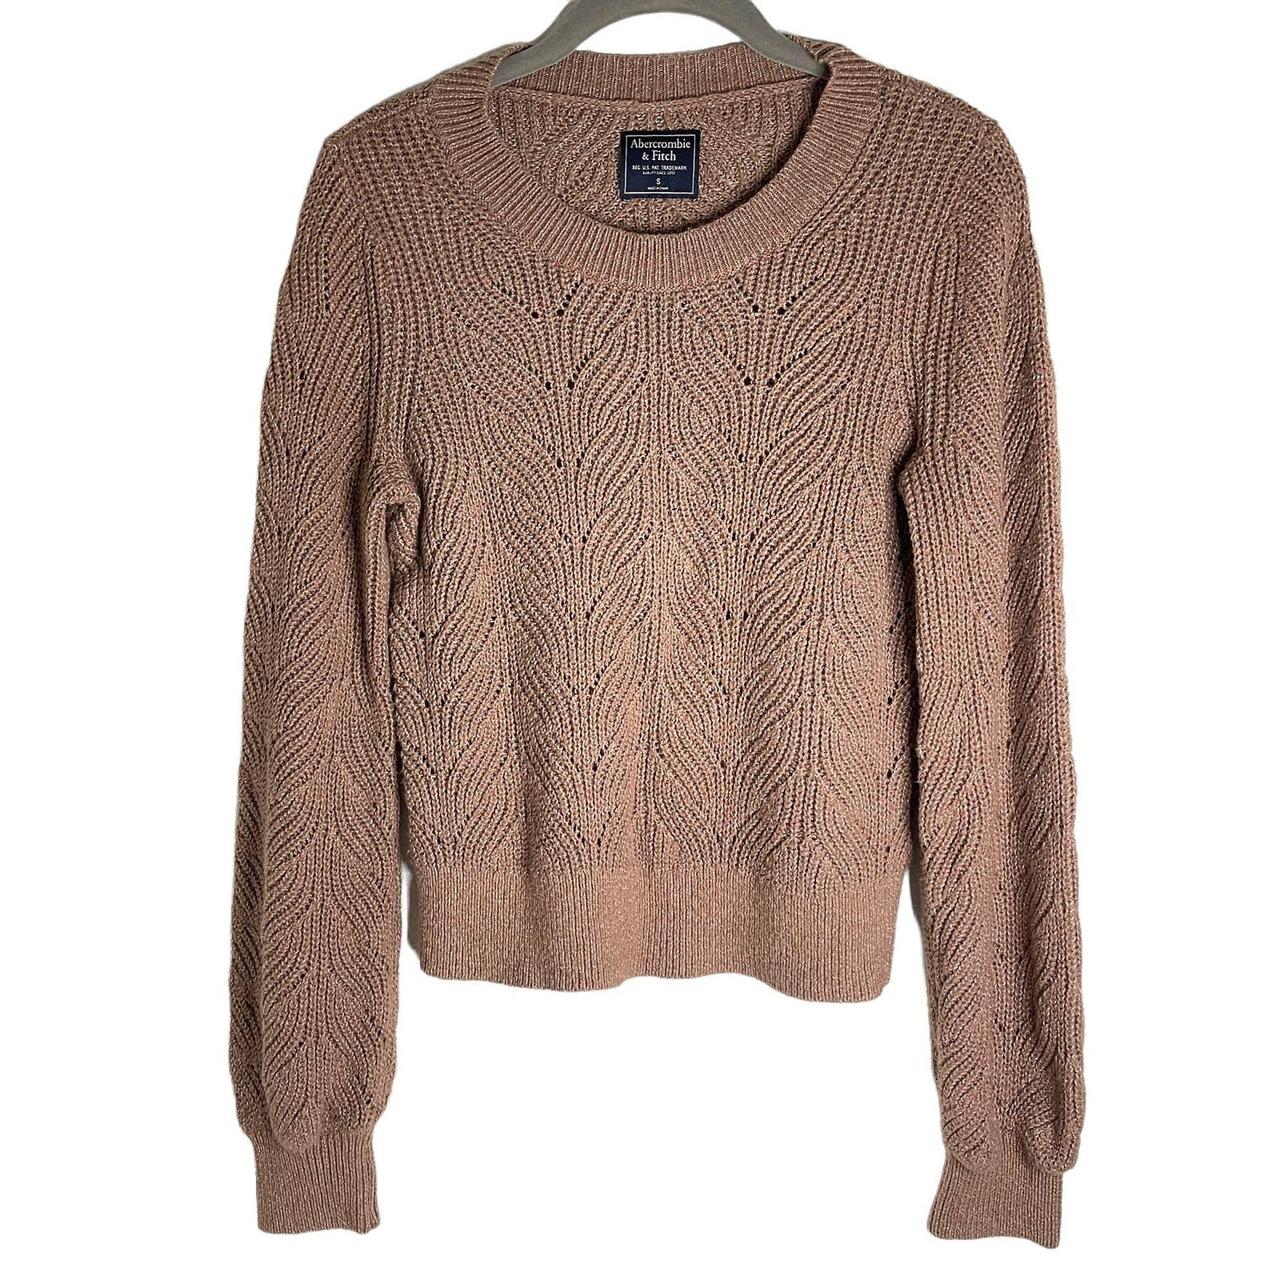 Abercrombie & Fitch Women's Brown Jumper